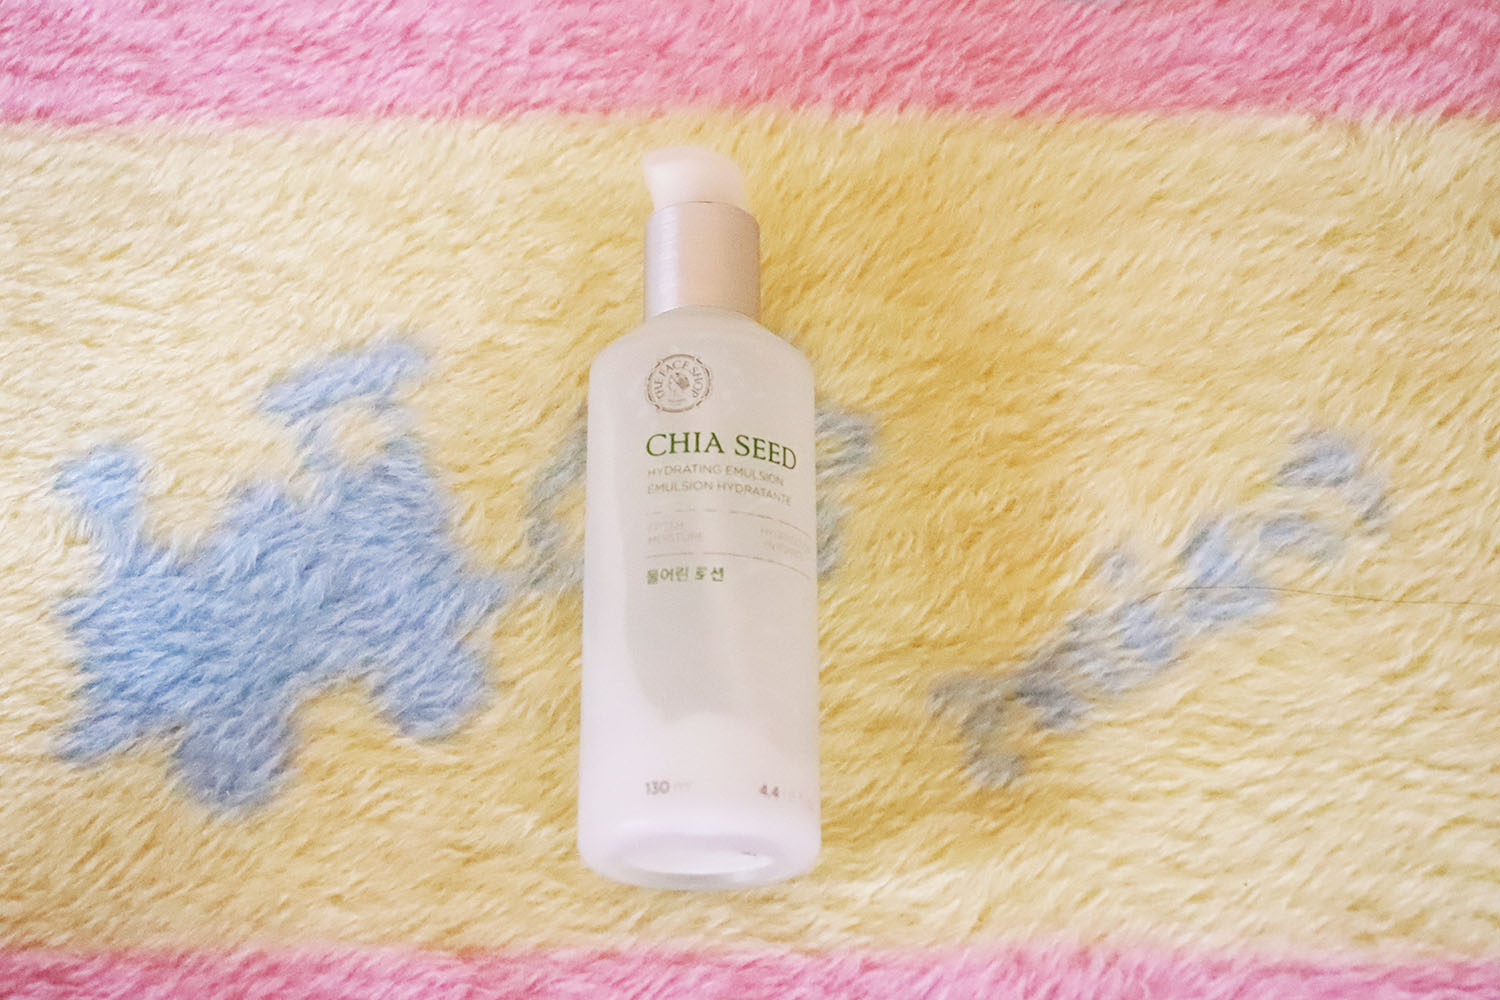 The Face Shop Chia Seed Hydrating Emulsion Review